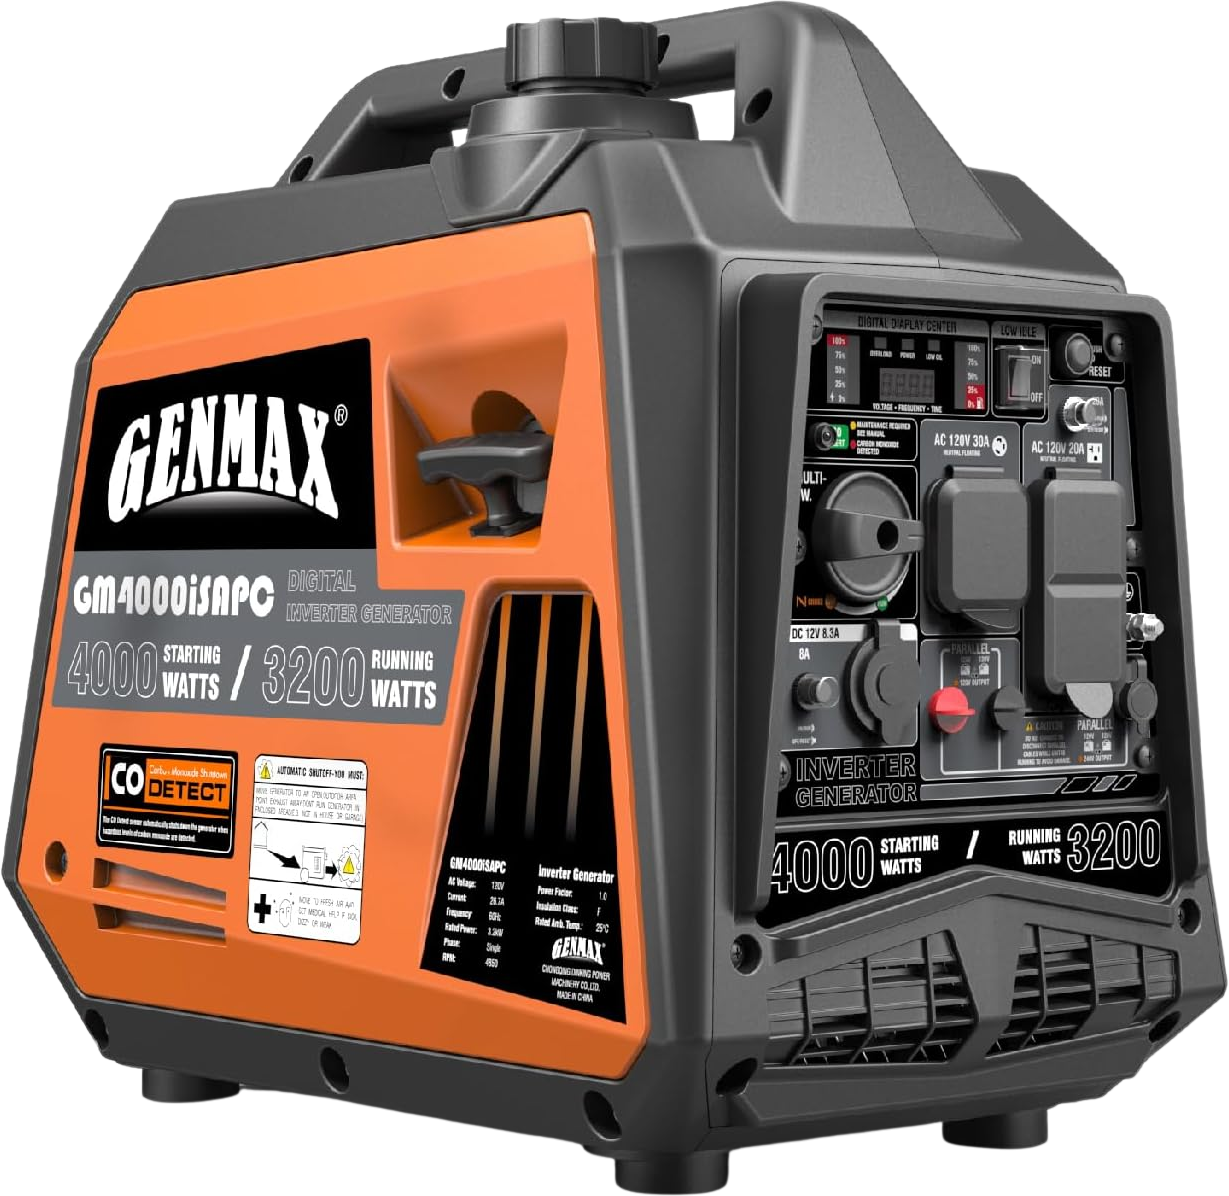 GENMAX GM4000iSAPC 3200W/4000W 26.7 Amp Gas Inverter Generator Parallel Ready with CO Detect New